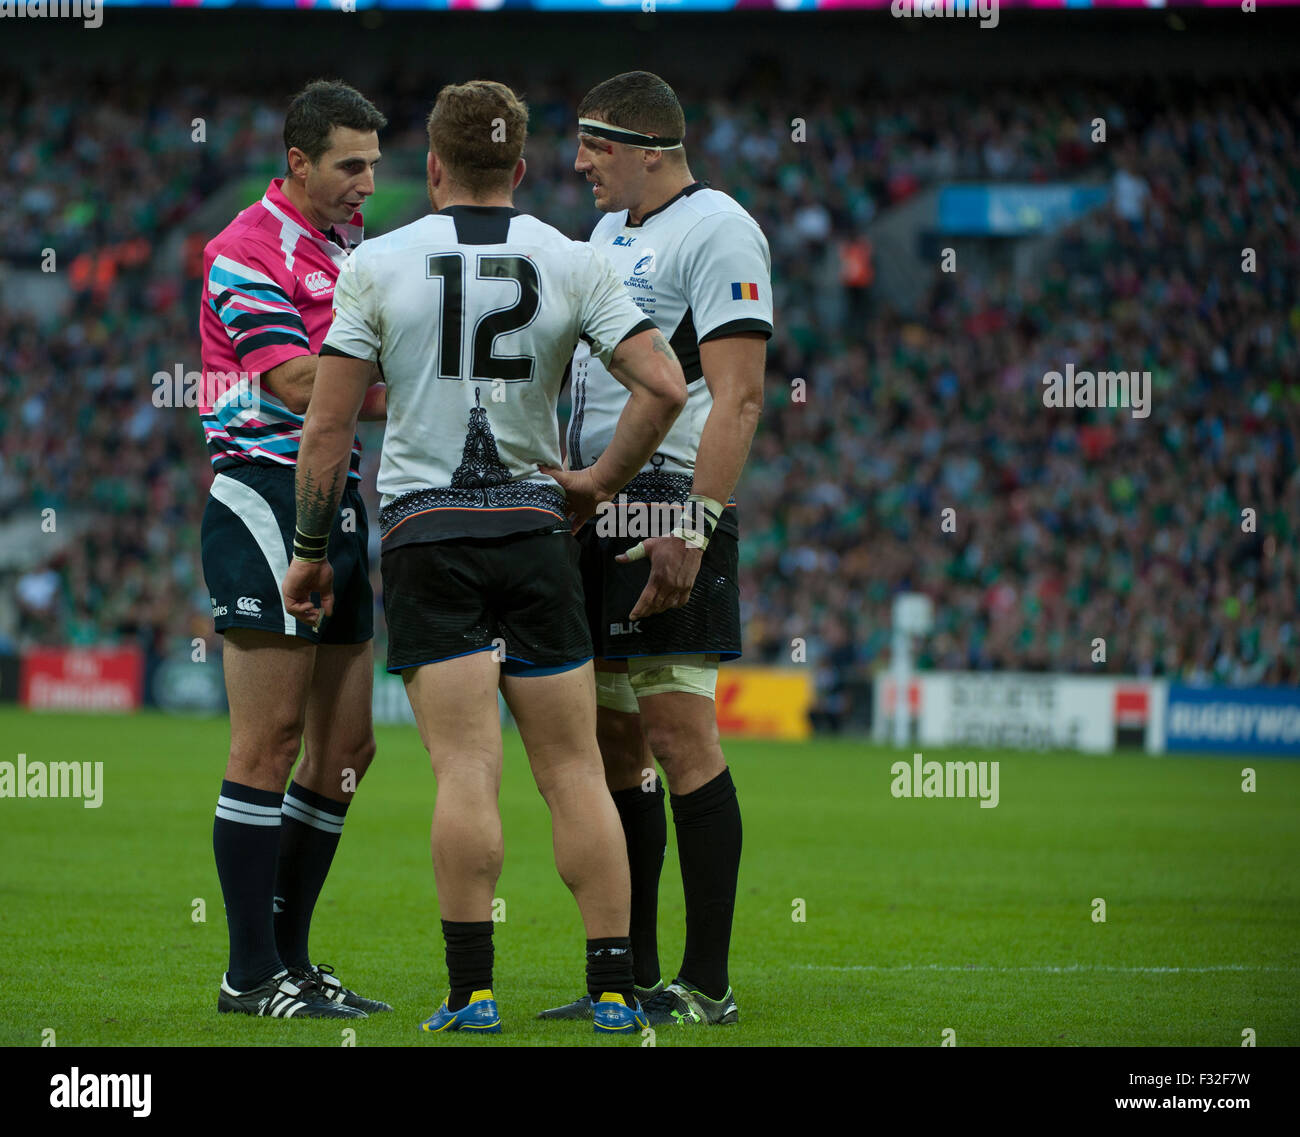 Wembley Stadium, London, UK. 27th September, 2015. Csaba Gal given yellow card in the Pool D match of the Rugby World Cup 2015. Stock Photo